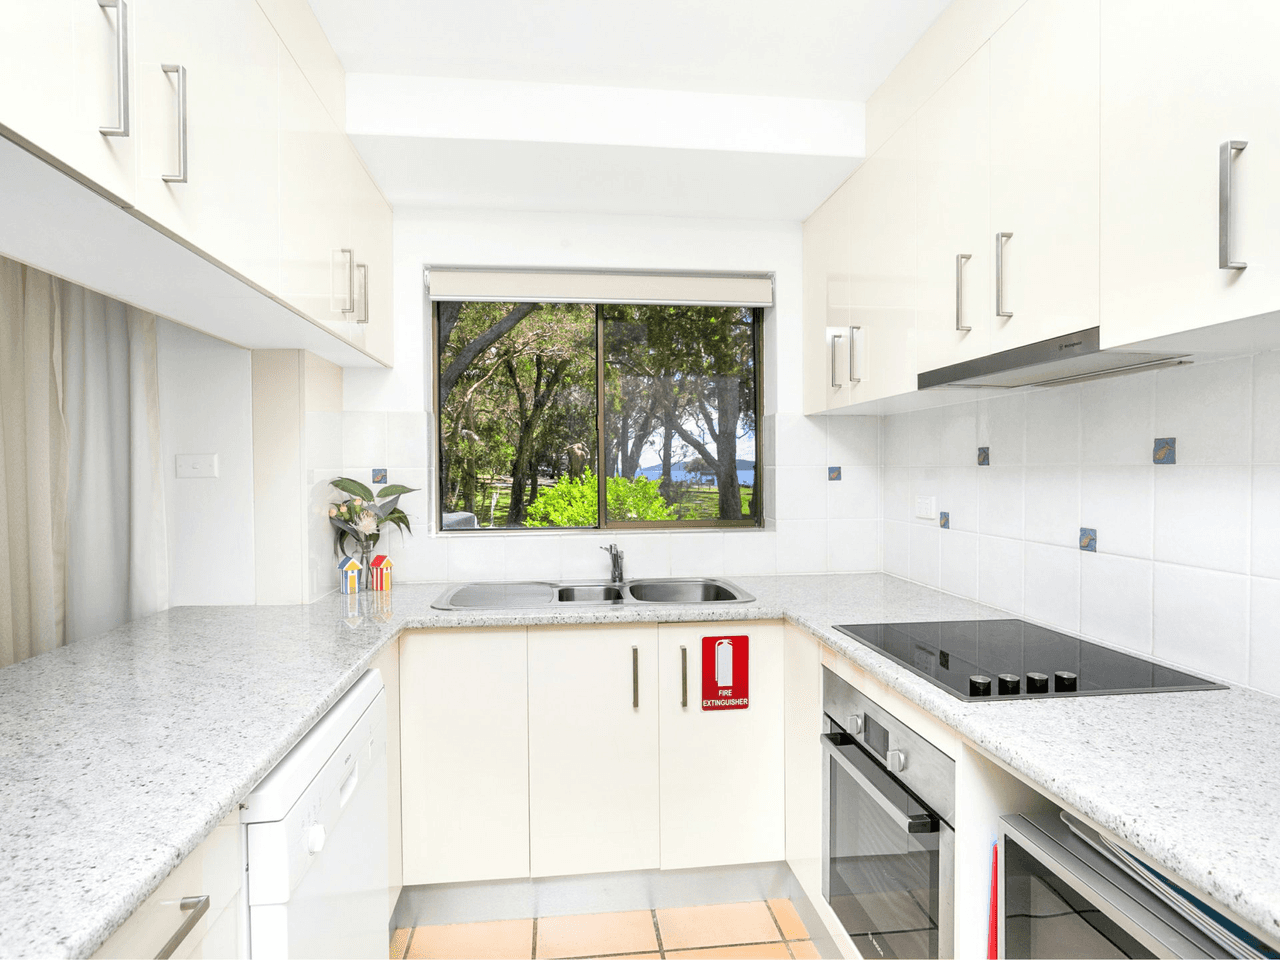 2/17 Mistral Close, NELSON BAY, NSW 2315